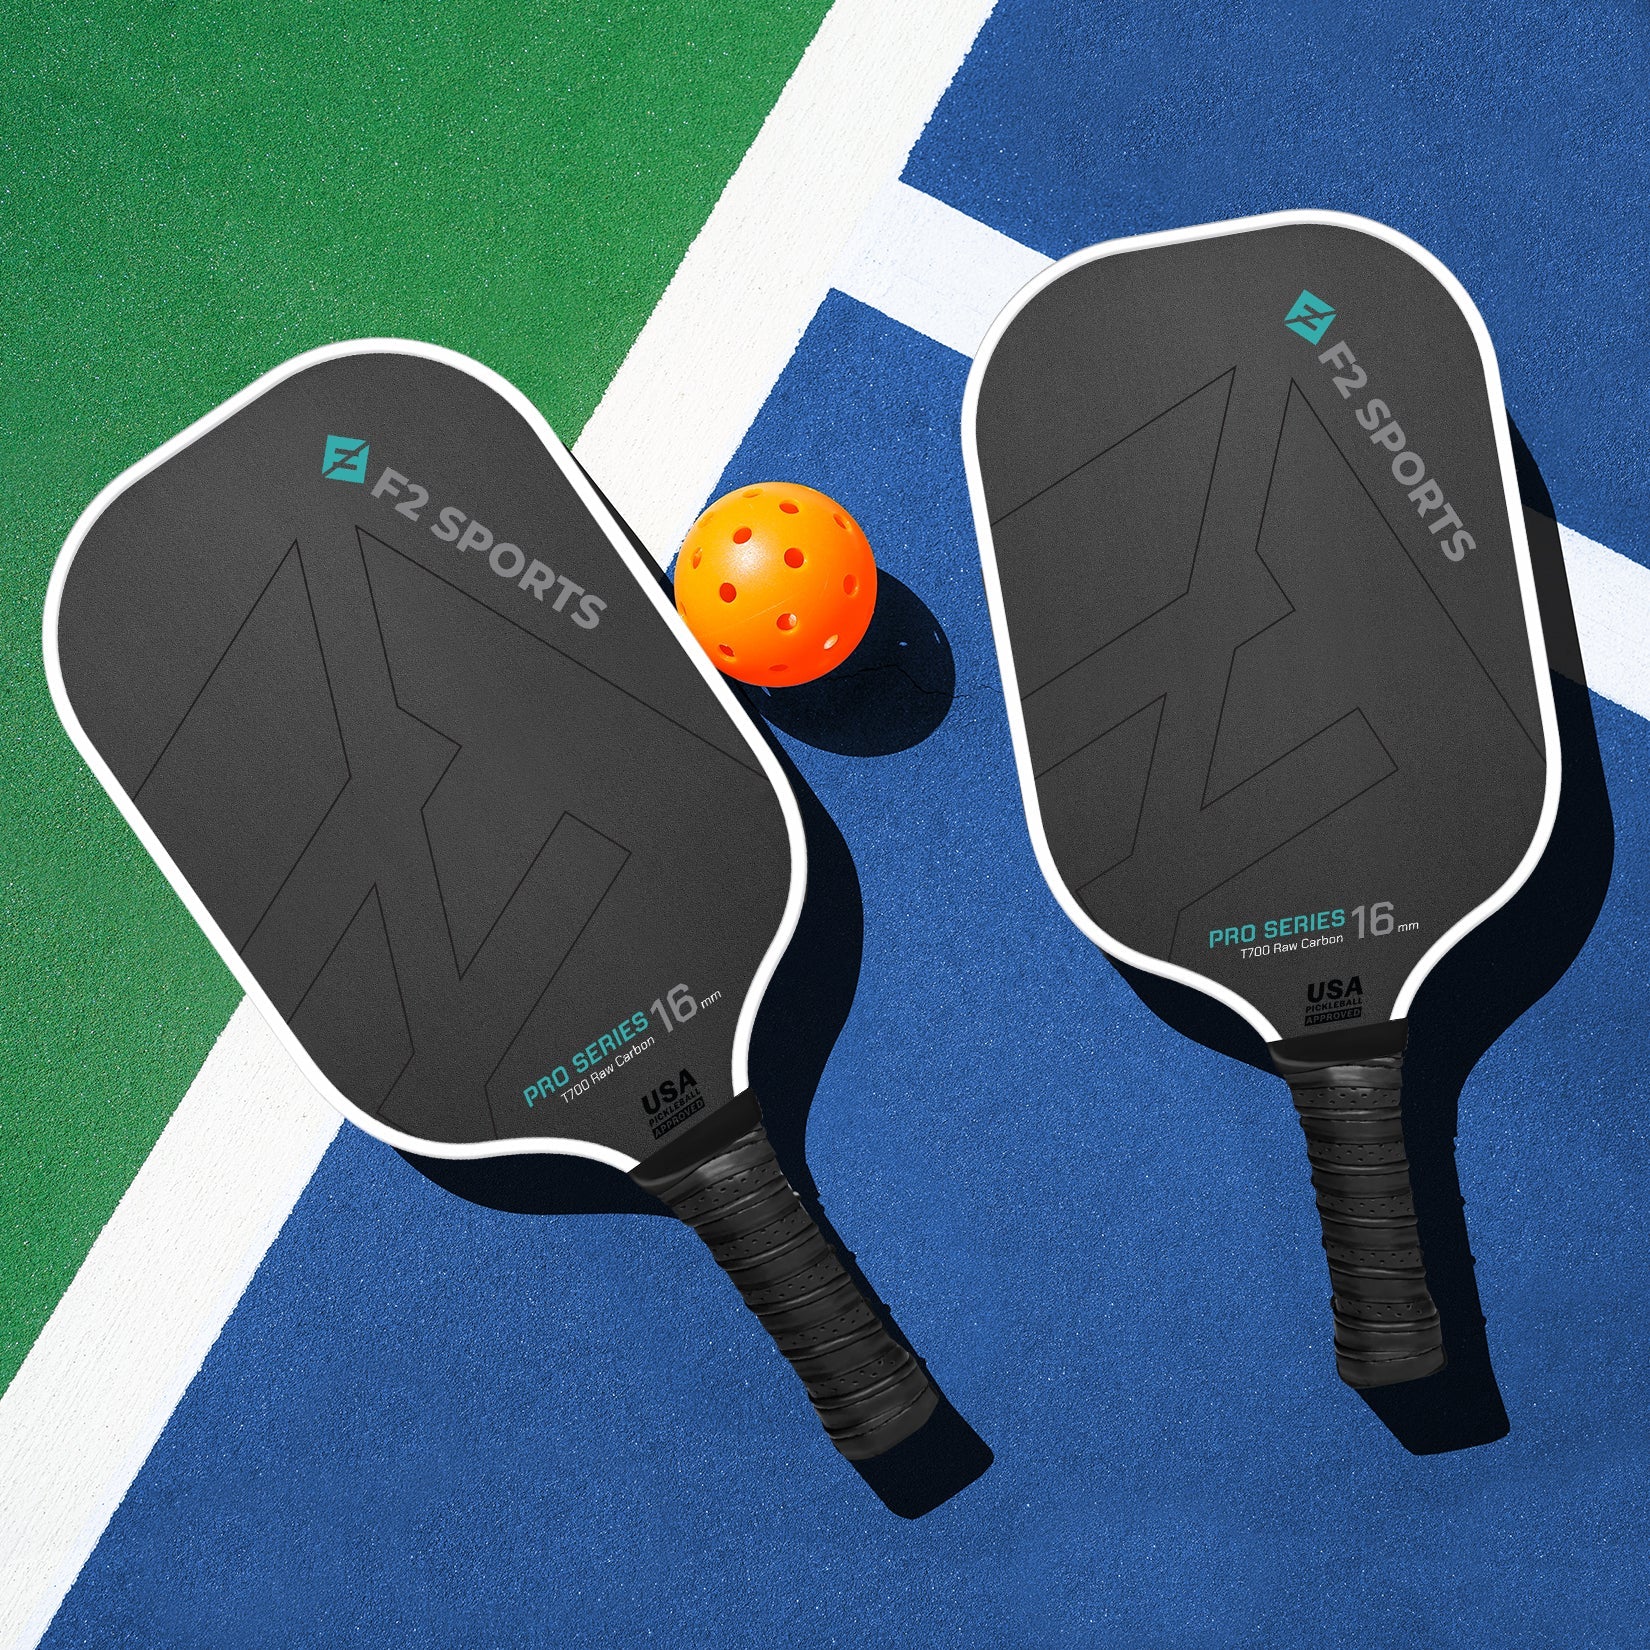 Toray T700 Carbon Pickleball Paddle- Elongated & Wide Shapes